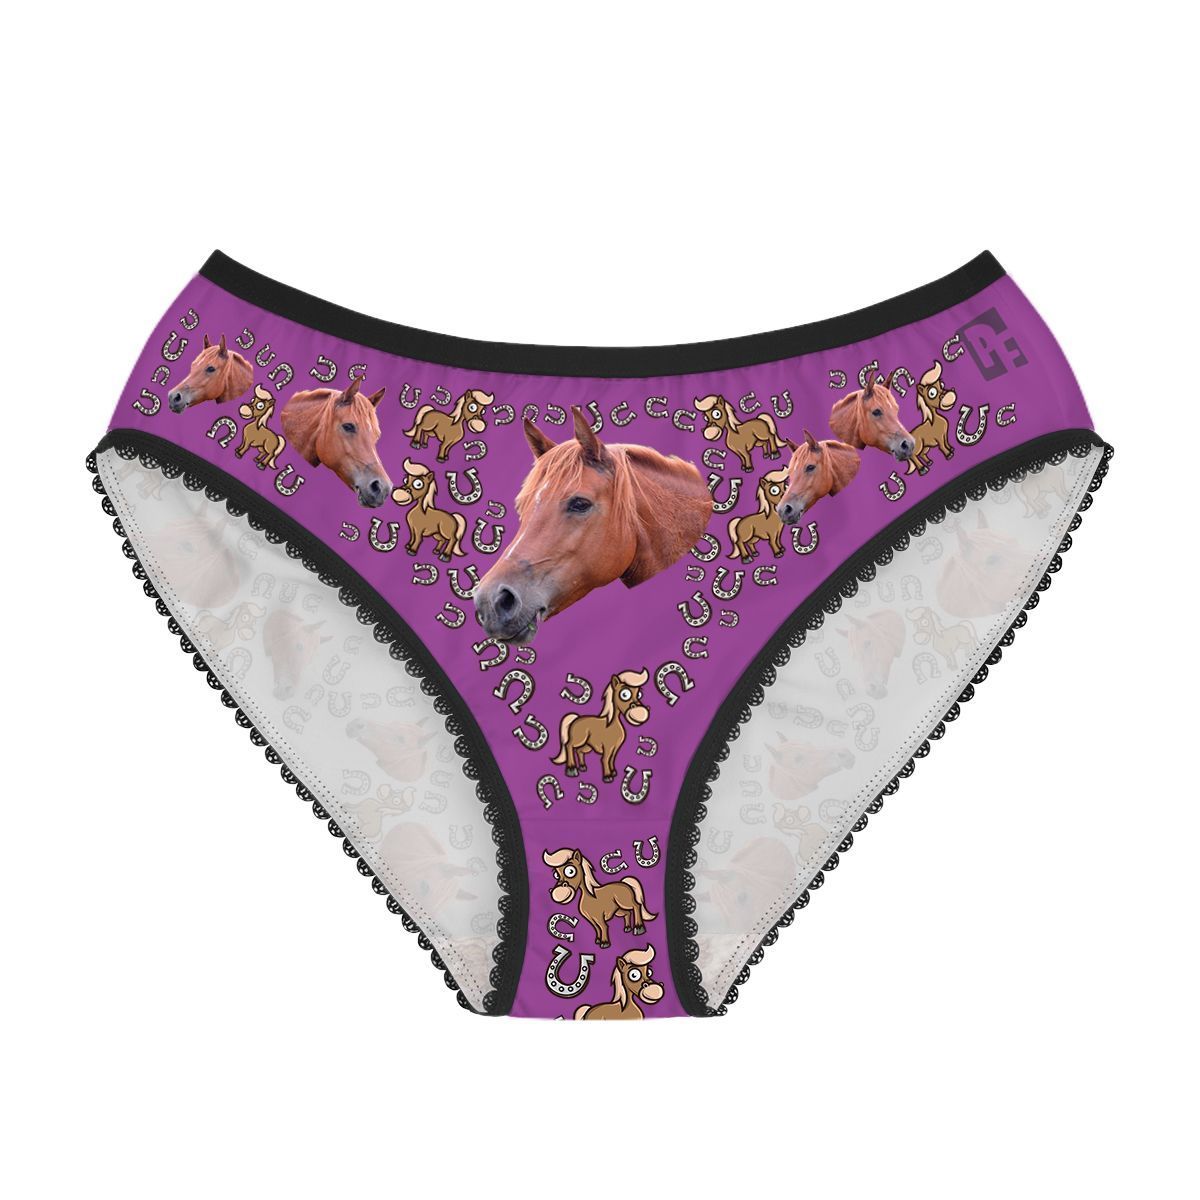 Purple Horse women's underwear briefs personalized with photo printed on them